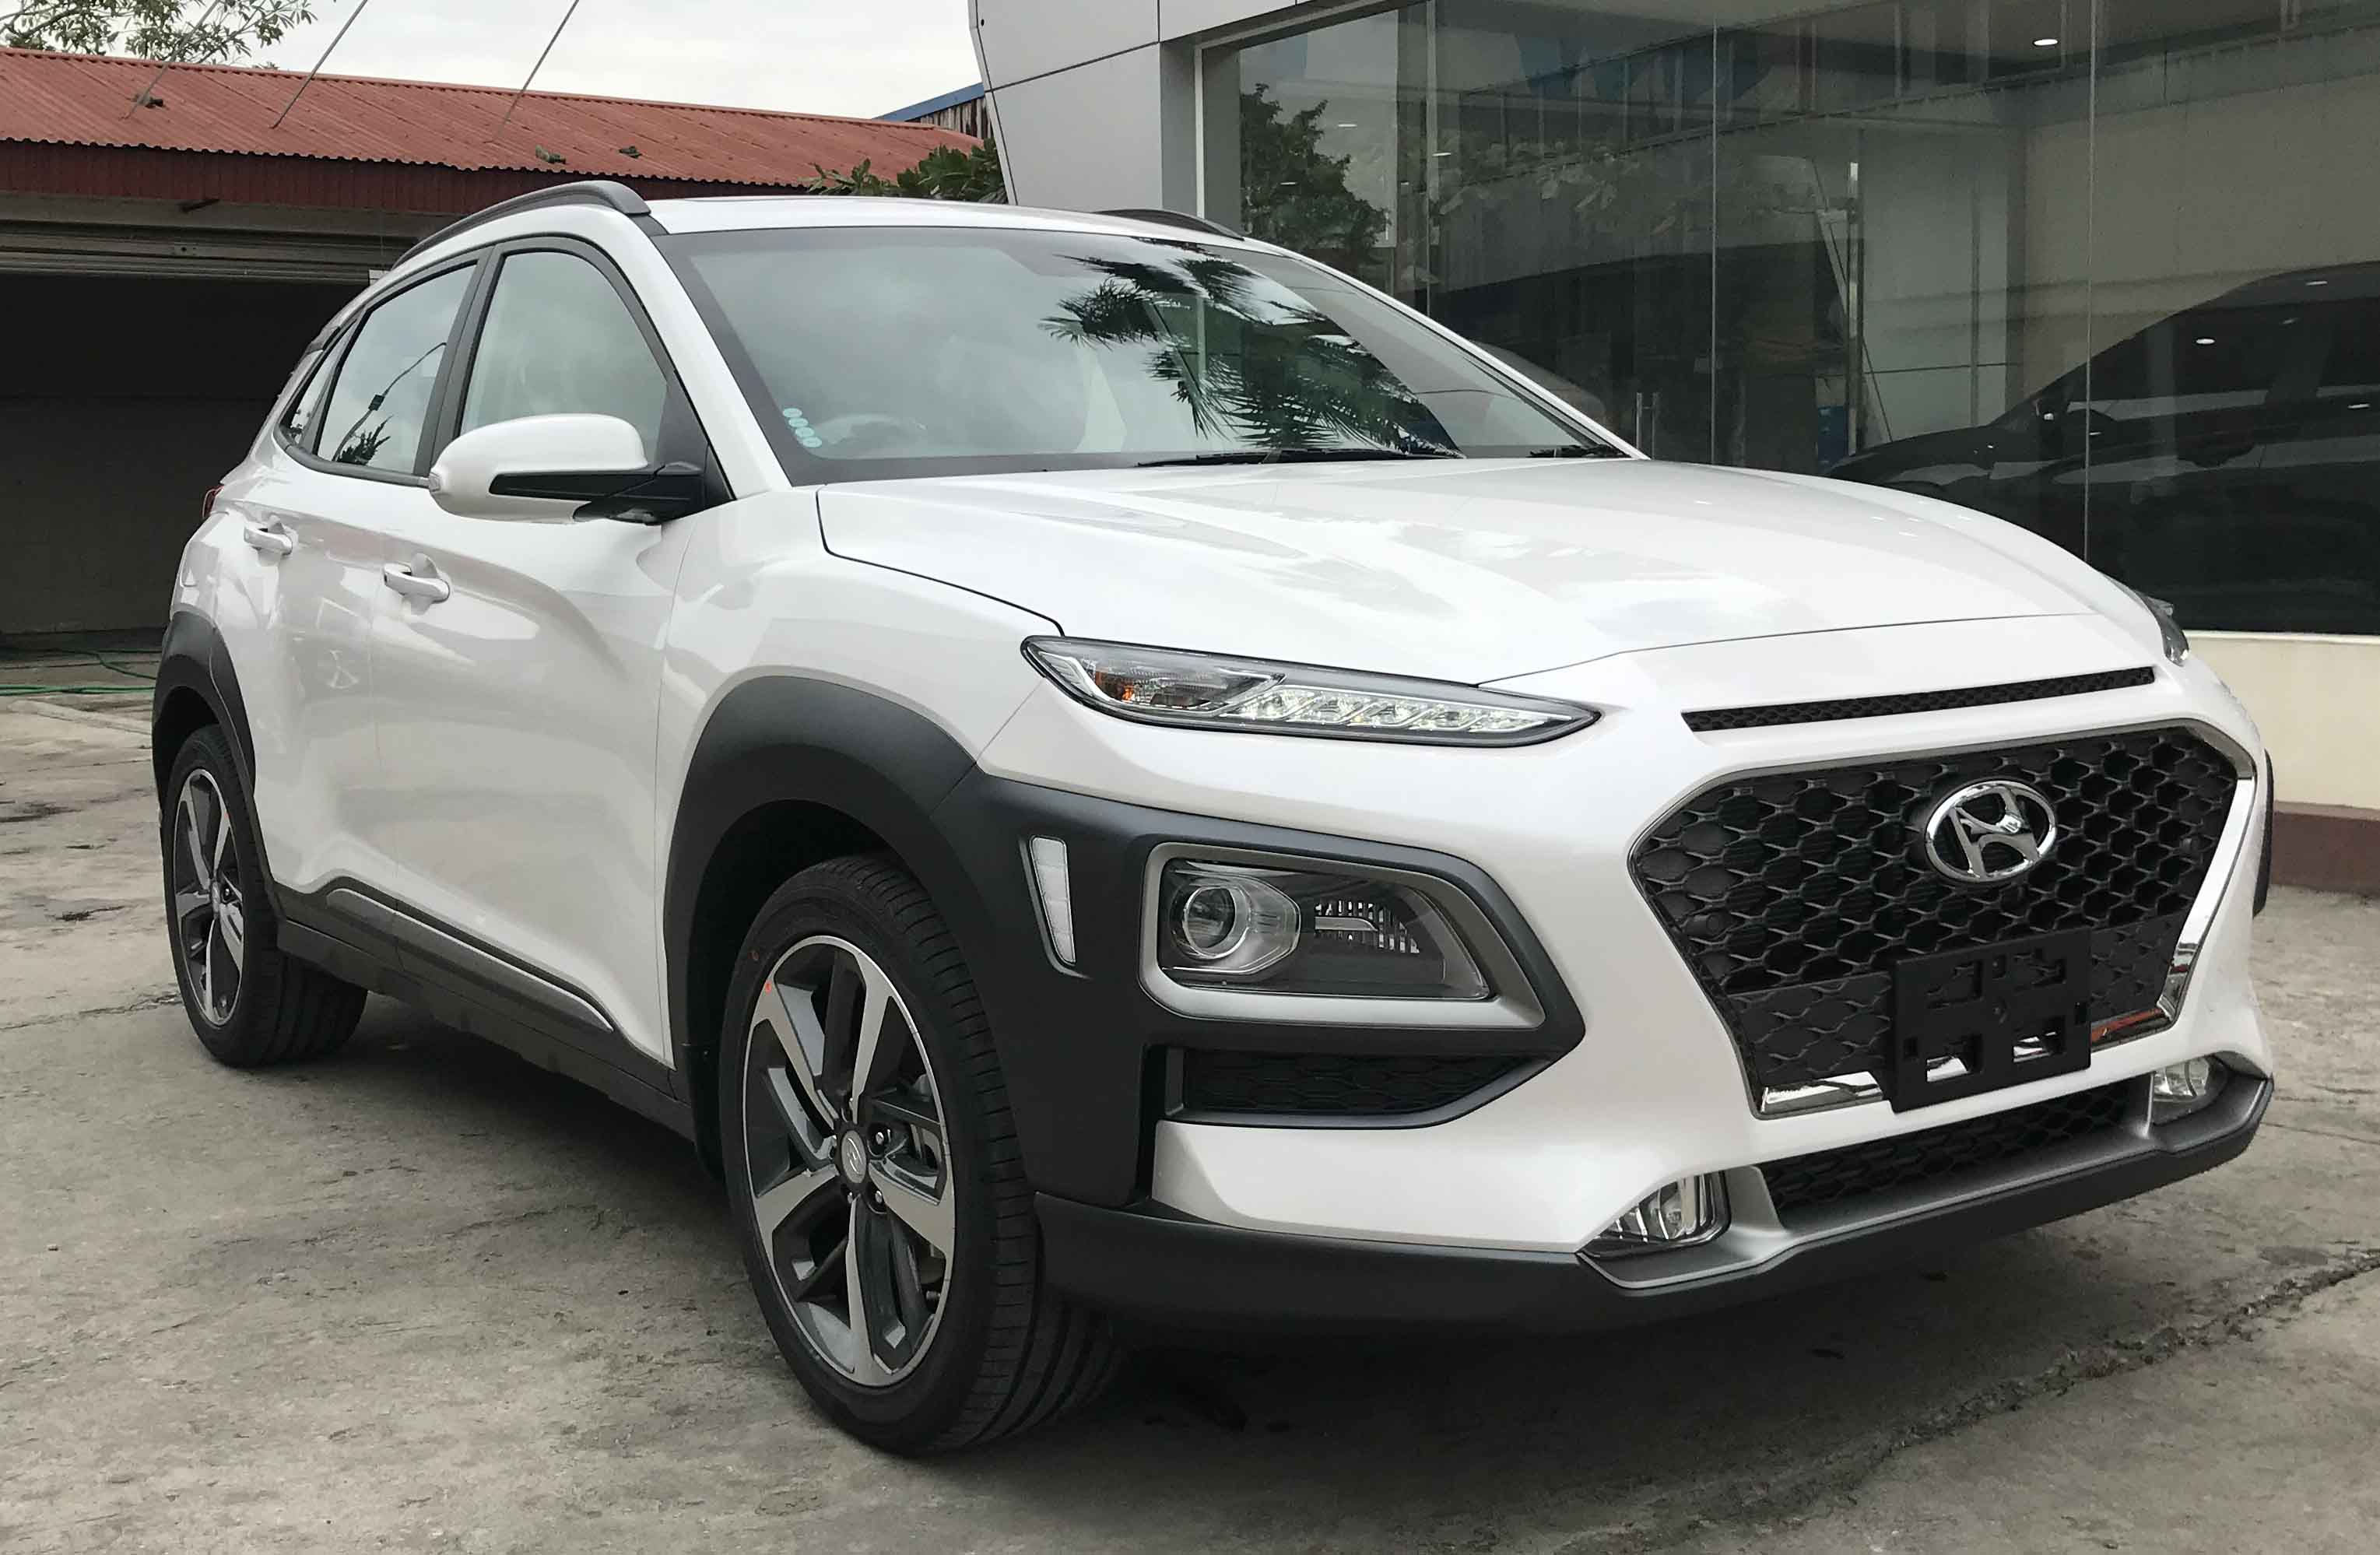 2021 Hyundai Kona pricing and specs detailed Facelift arrives for Kia  Seltos Mazda CX30 Toyota CHR and Honda HRV rival  Car News  CarsGuide